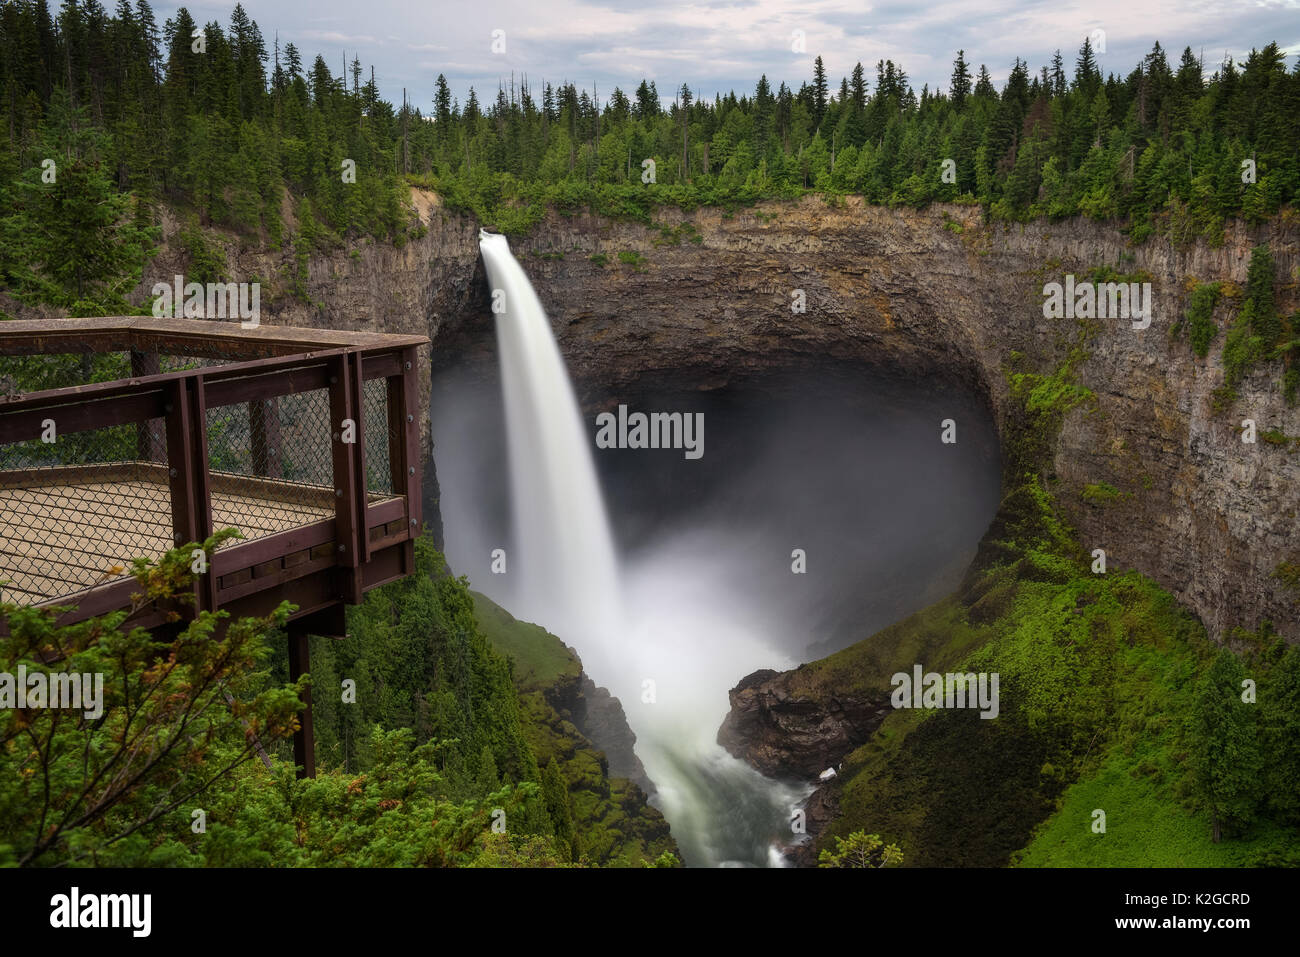 Helmcken Falls and an outlook platform in Wells Gray Provincial Park near Clearwater, British Columbia, Canada. Long exposure. Stock Photo